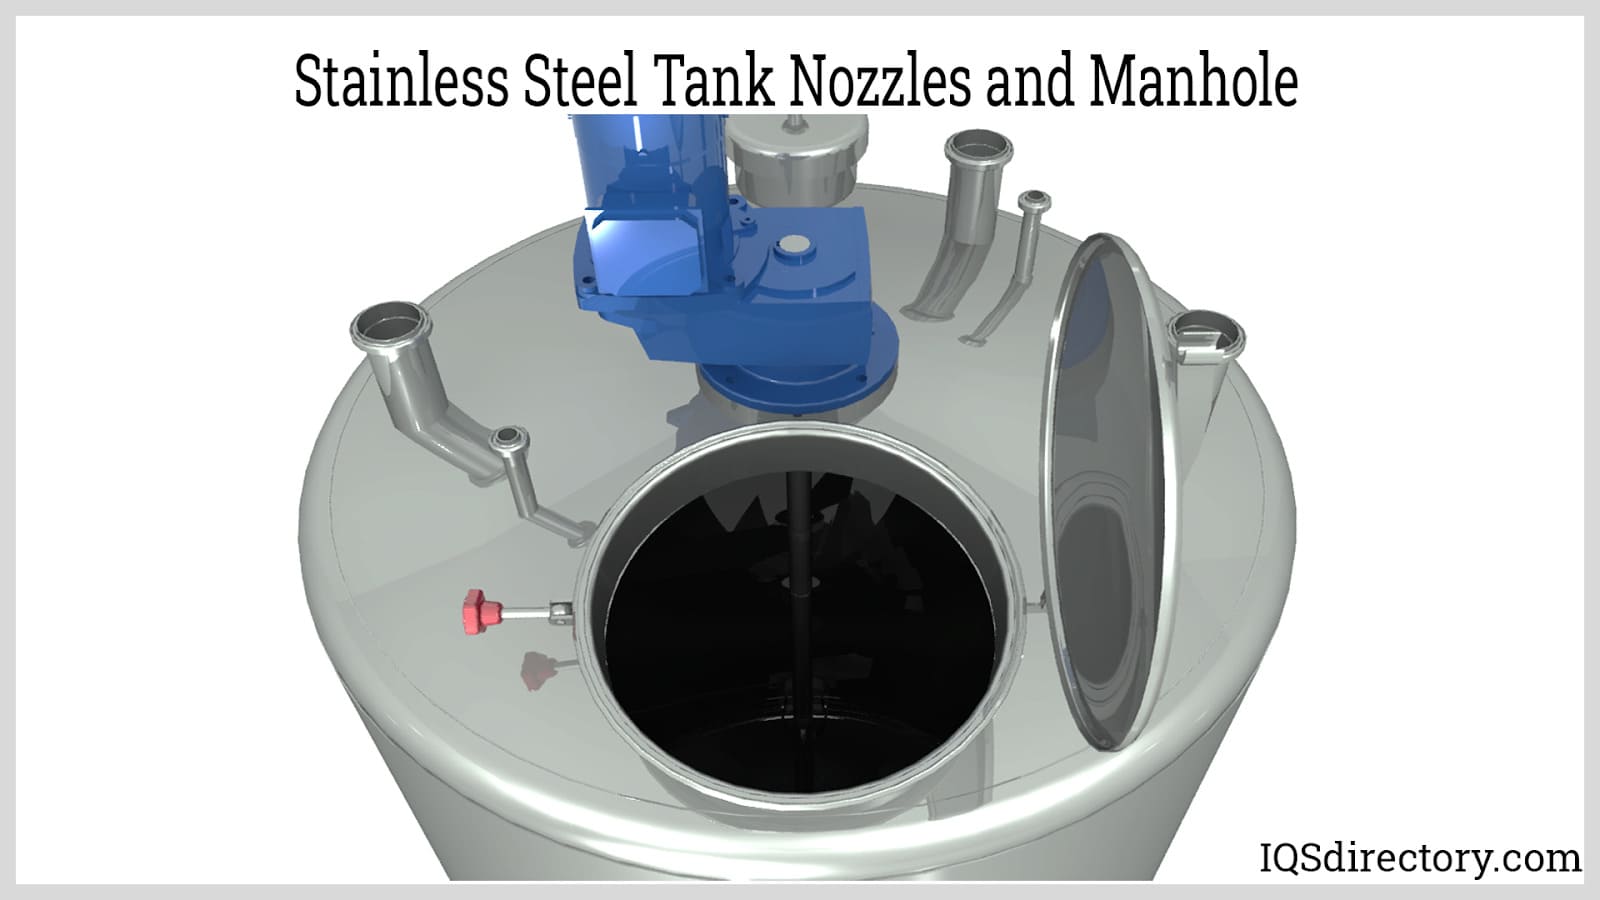 Stainless Steel Tank Nozzles and Manhole